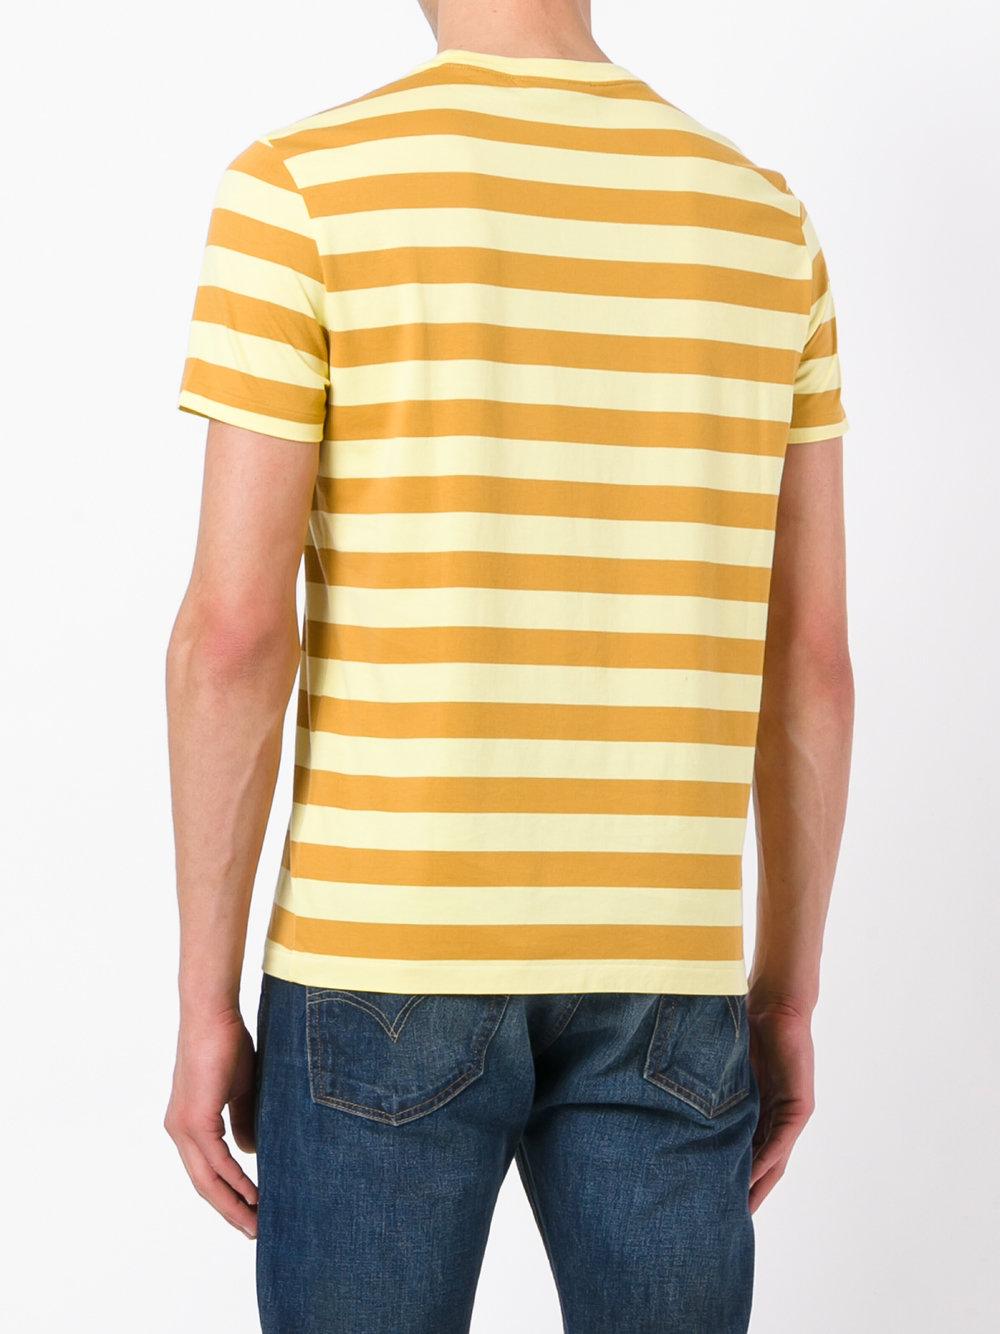 Lyst - Burberry Striped Cotton T-shirt Pale Yellow/ochre Yellow in ...